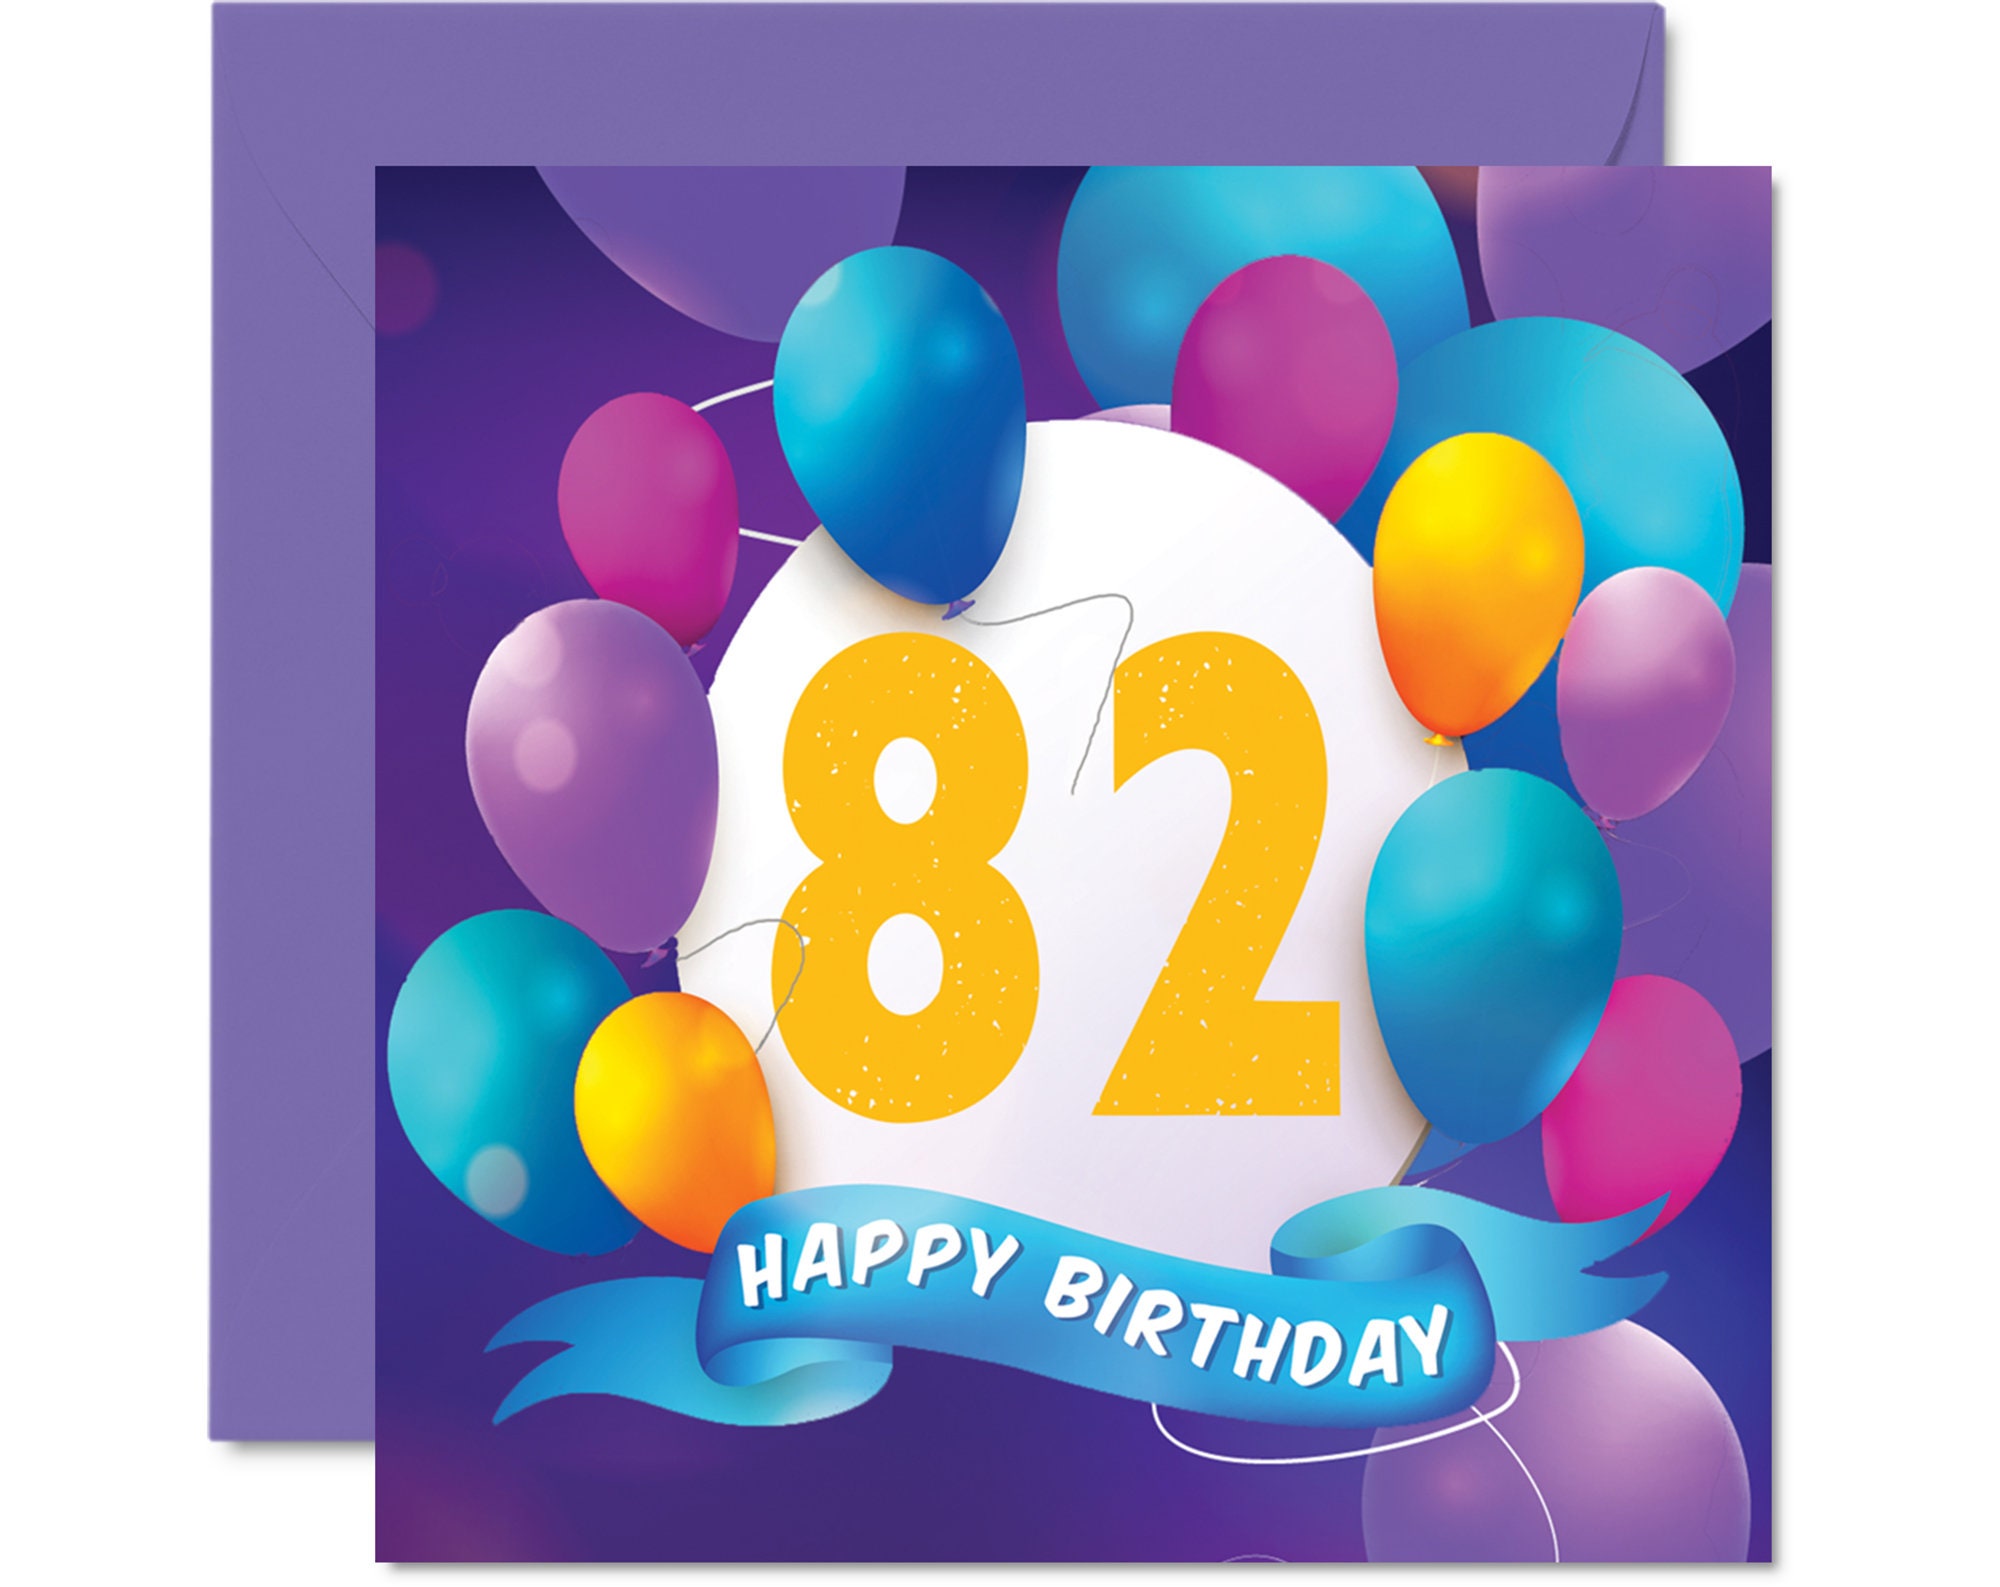 Acrylic Black 'eighty two' Script Birthday Cake Topper - Online Party  Supplies